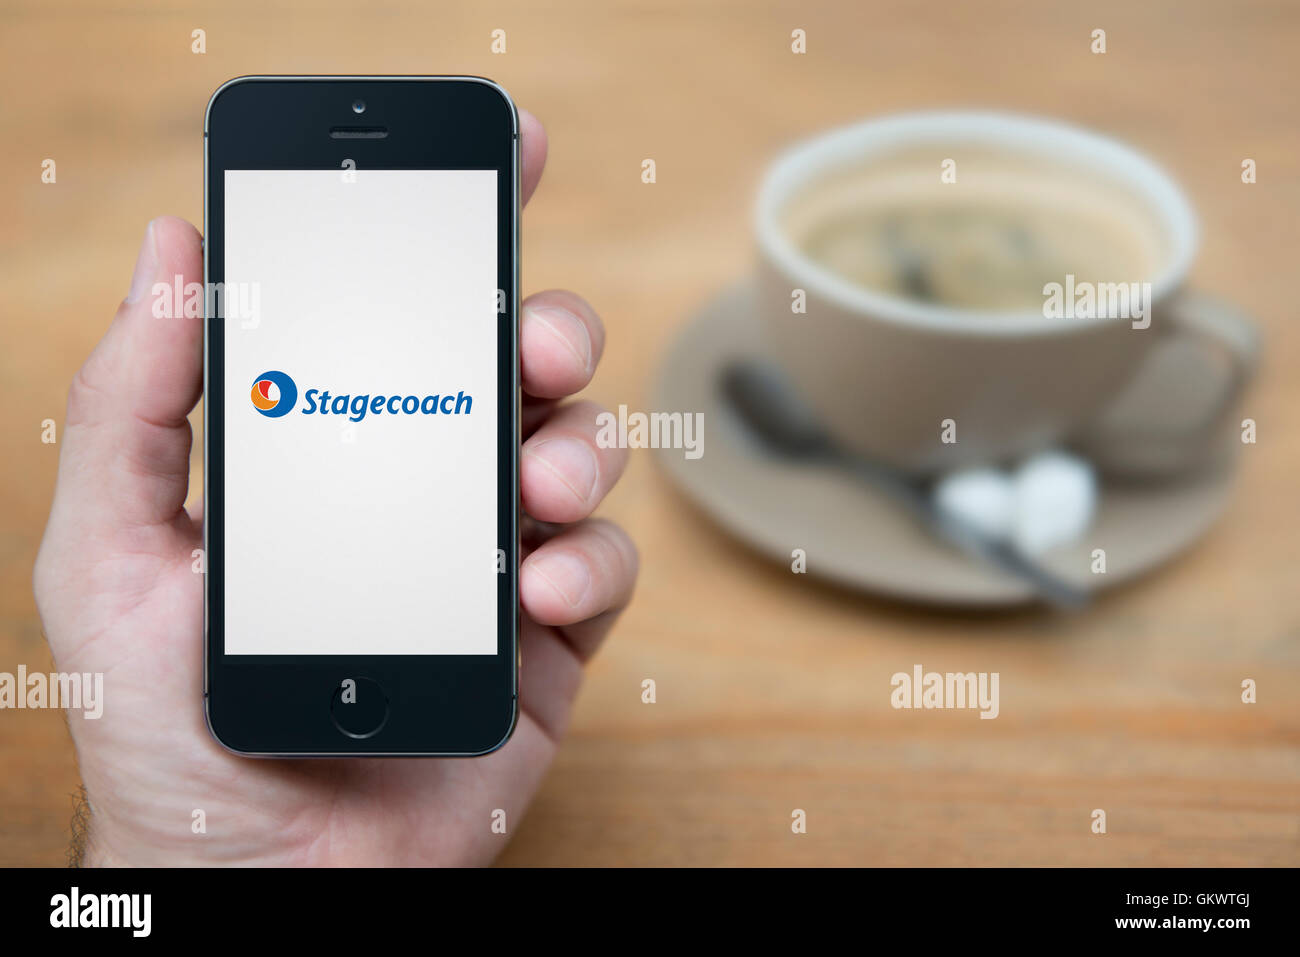 A man looks at his iPhone which displays the Stagecoach logo, while sat with a cup of coffee (Editorial use only). Stock Photo